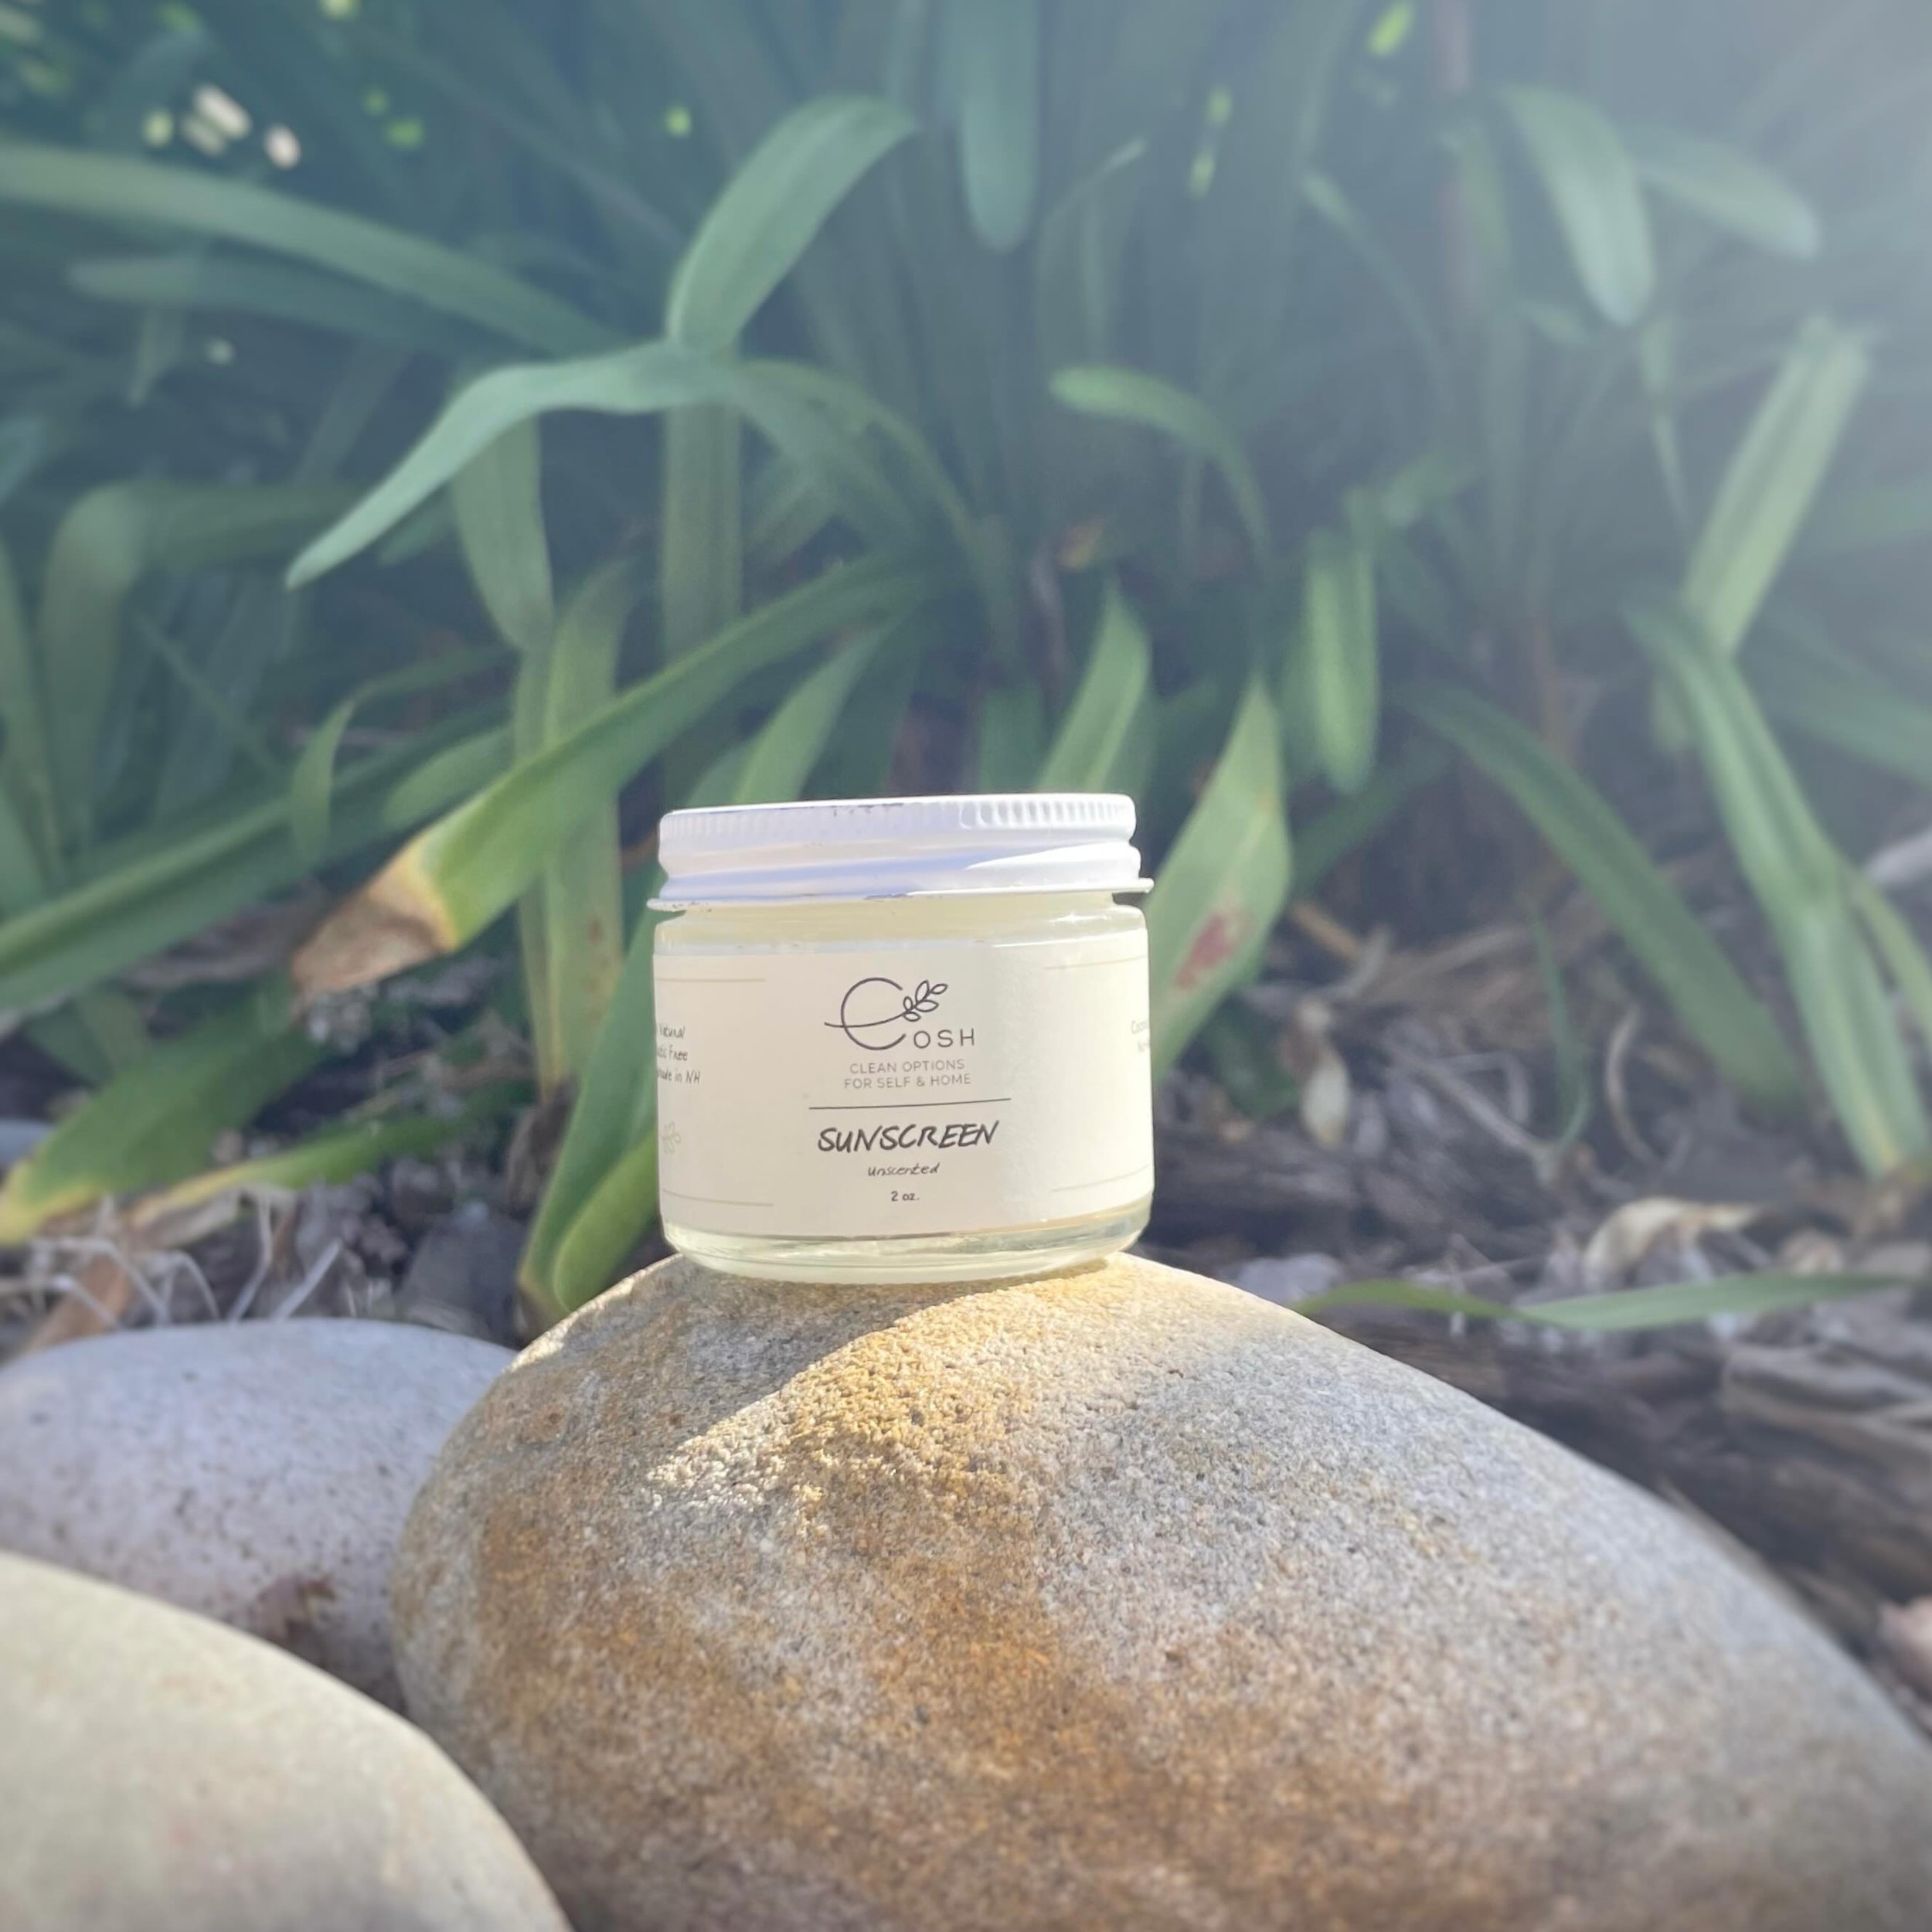 The sun is shining &amp; we&rsquo;ve got what you need to protect your skin&hellip;.without all the chemicals! ☀️ ☀️ 

Our all-natural sunscreen contains non-nano zinc oxide, which stays topical on the skin, as to not allow for absorption into the bl